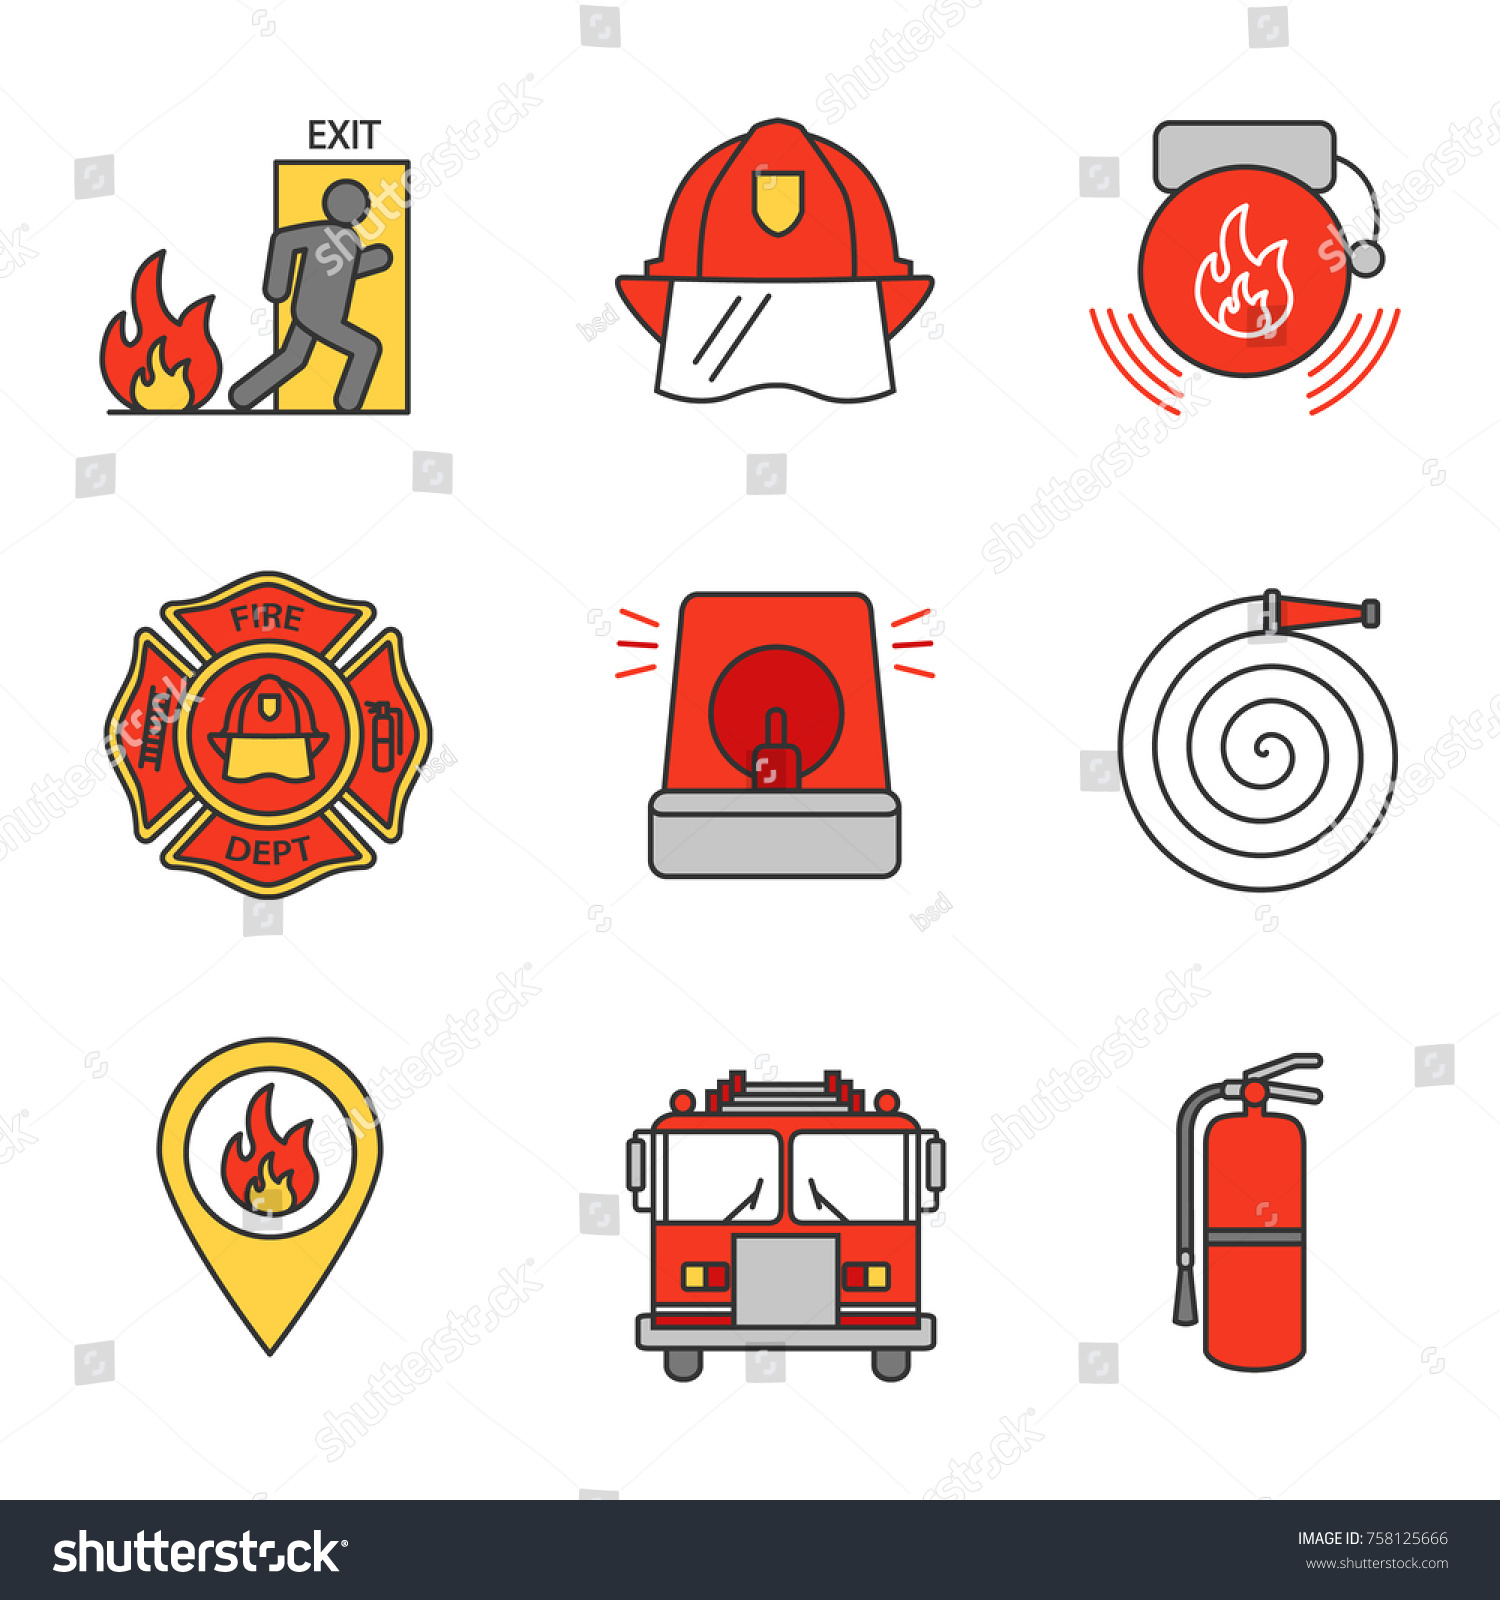 Alarm icon, Color icon, Firefighter hat